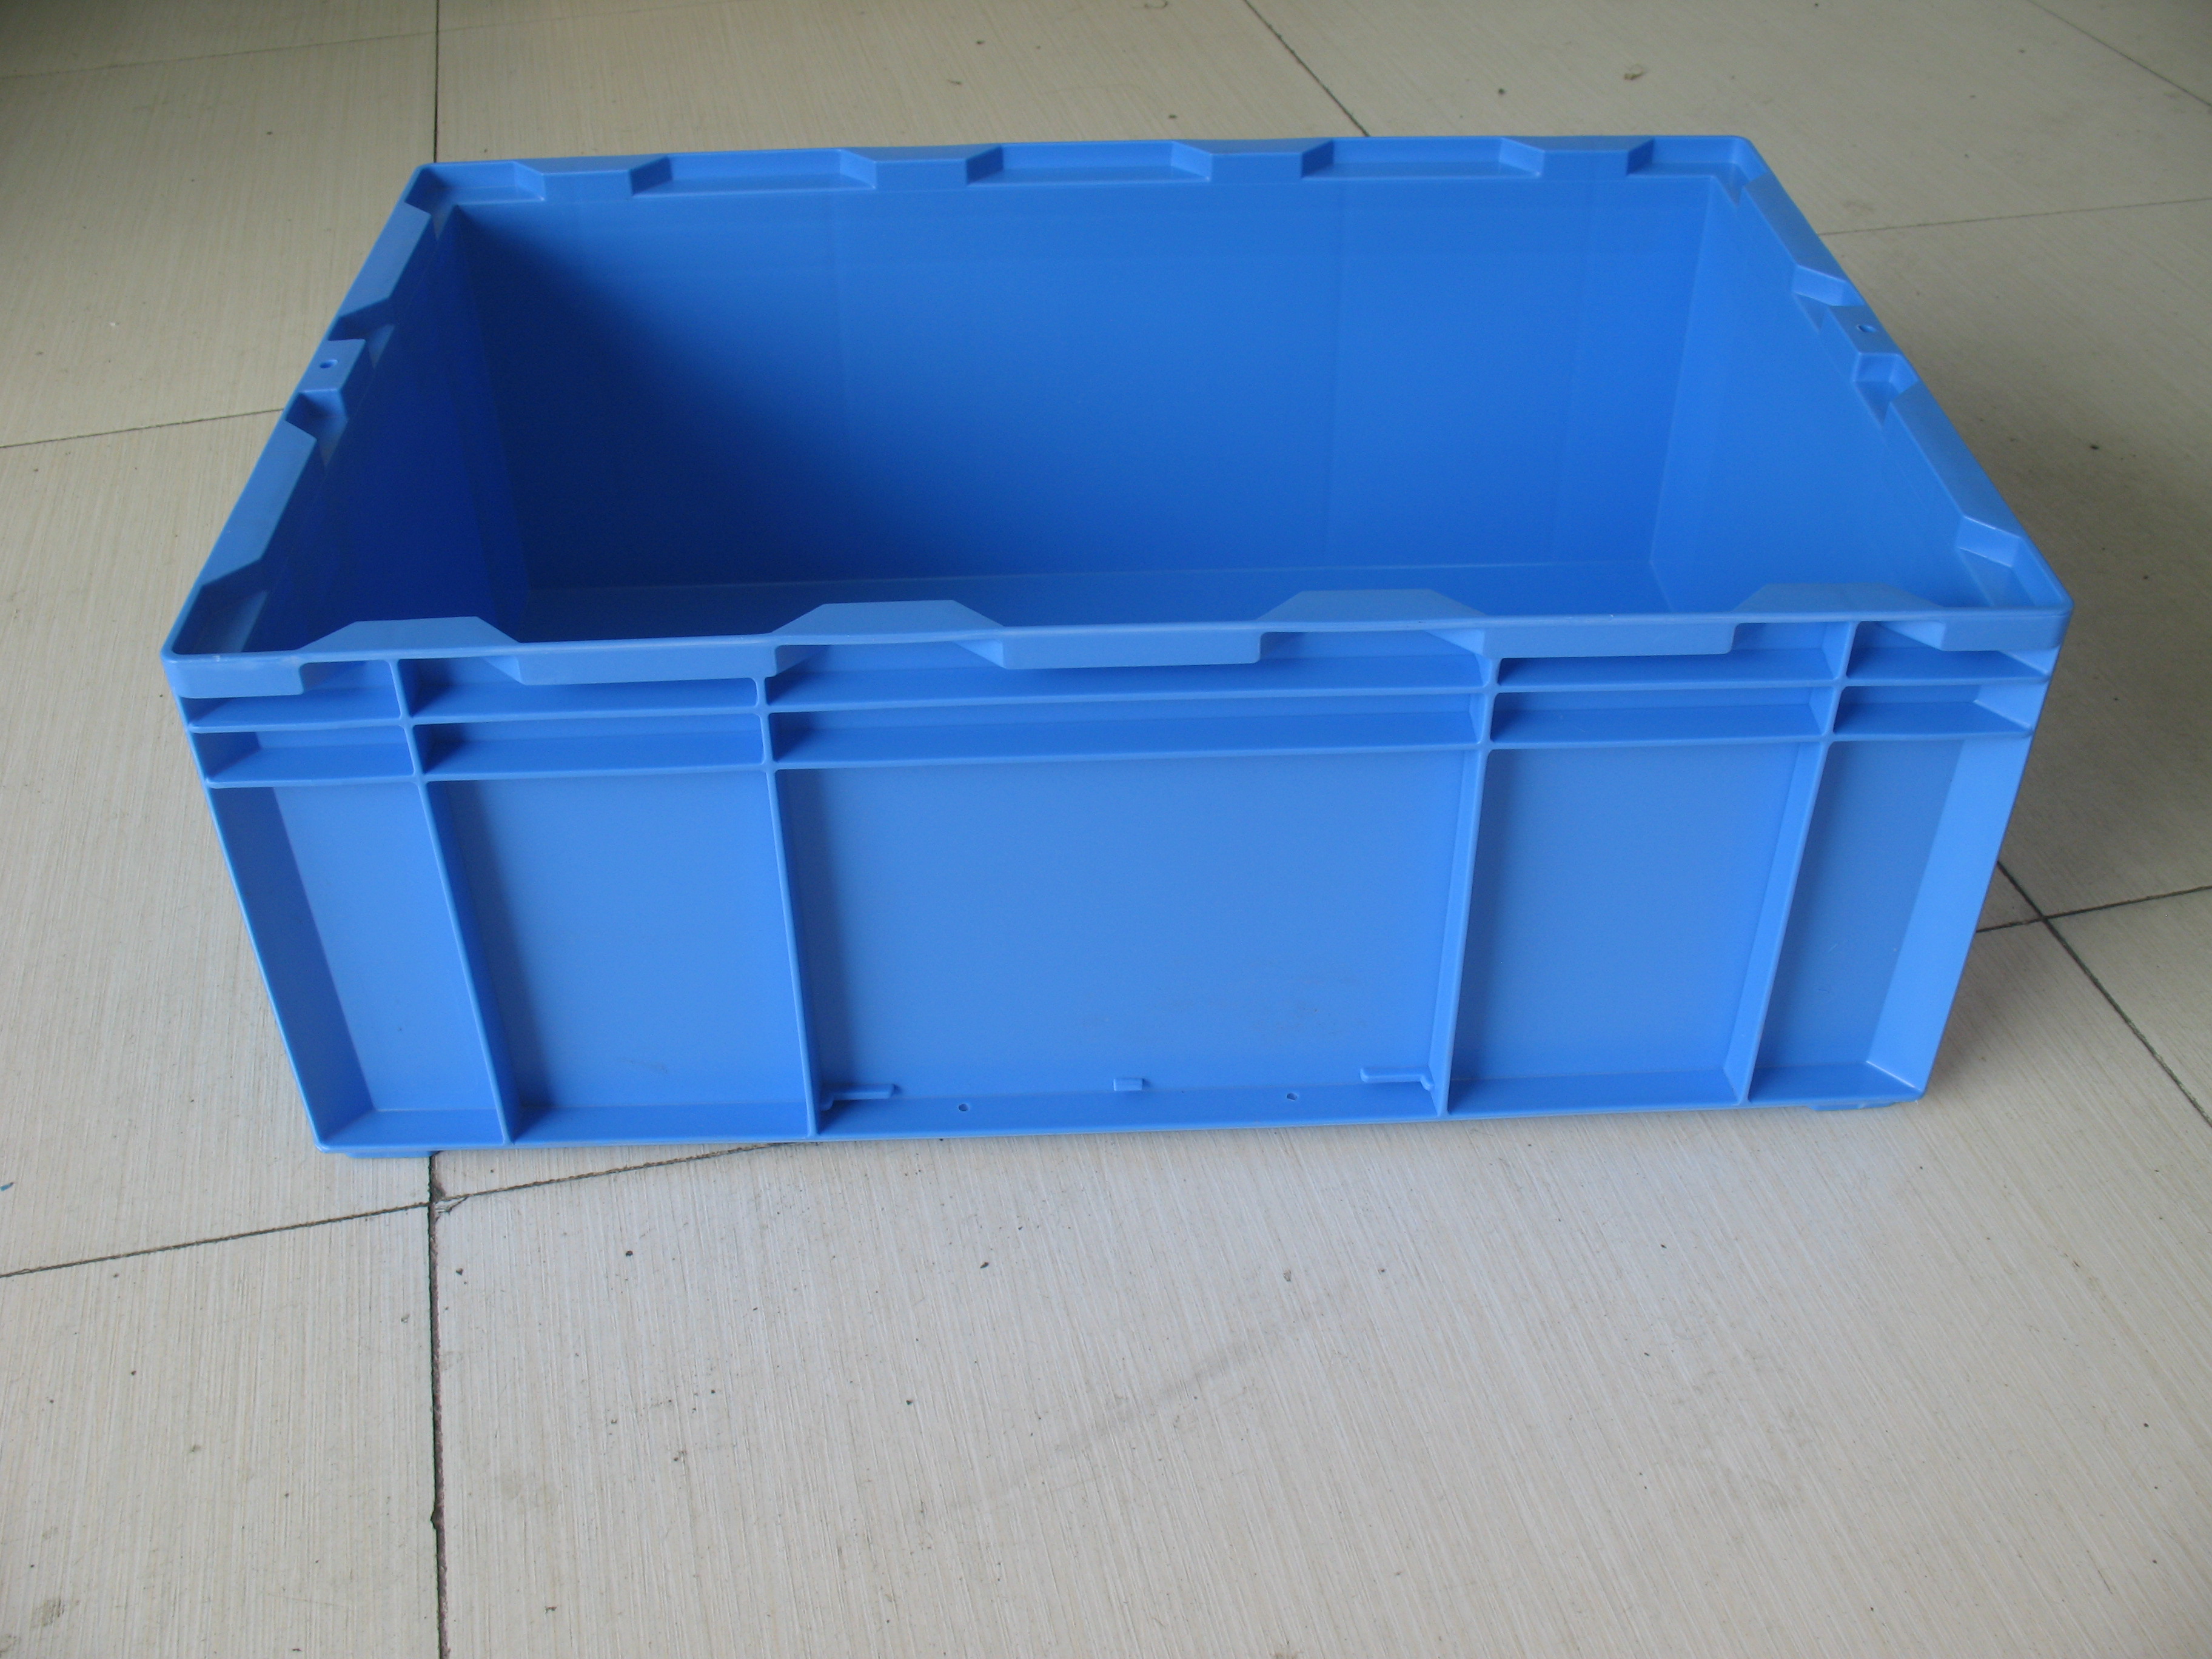 Plastic Euro Stacking Containers Manufacturer & Supplier | Euro